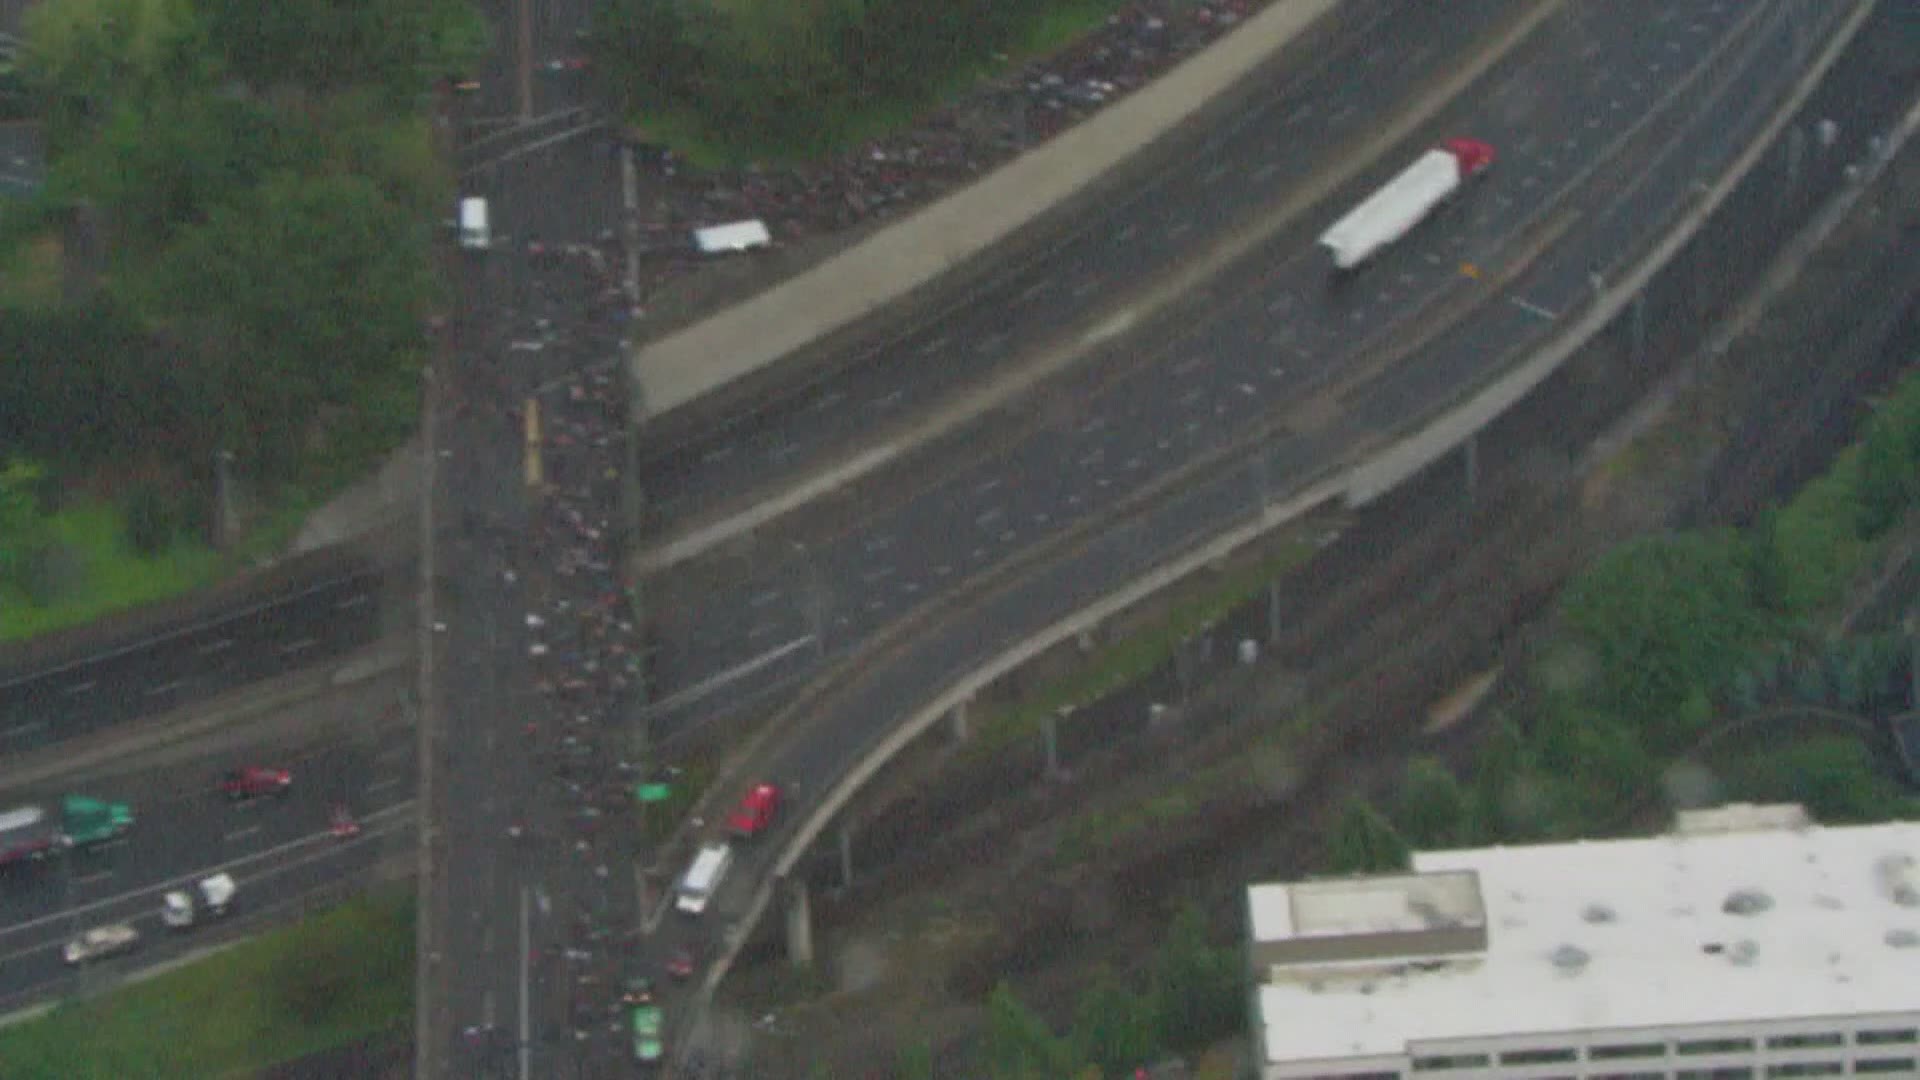 Protesters marched on I-84 and then exited towards the Alberta Arts District in NE Portland, protesting the death of George Floyd and systemic racism.